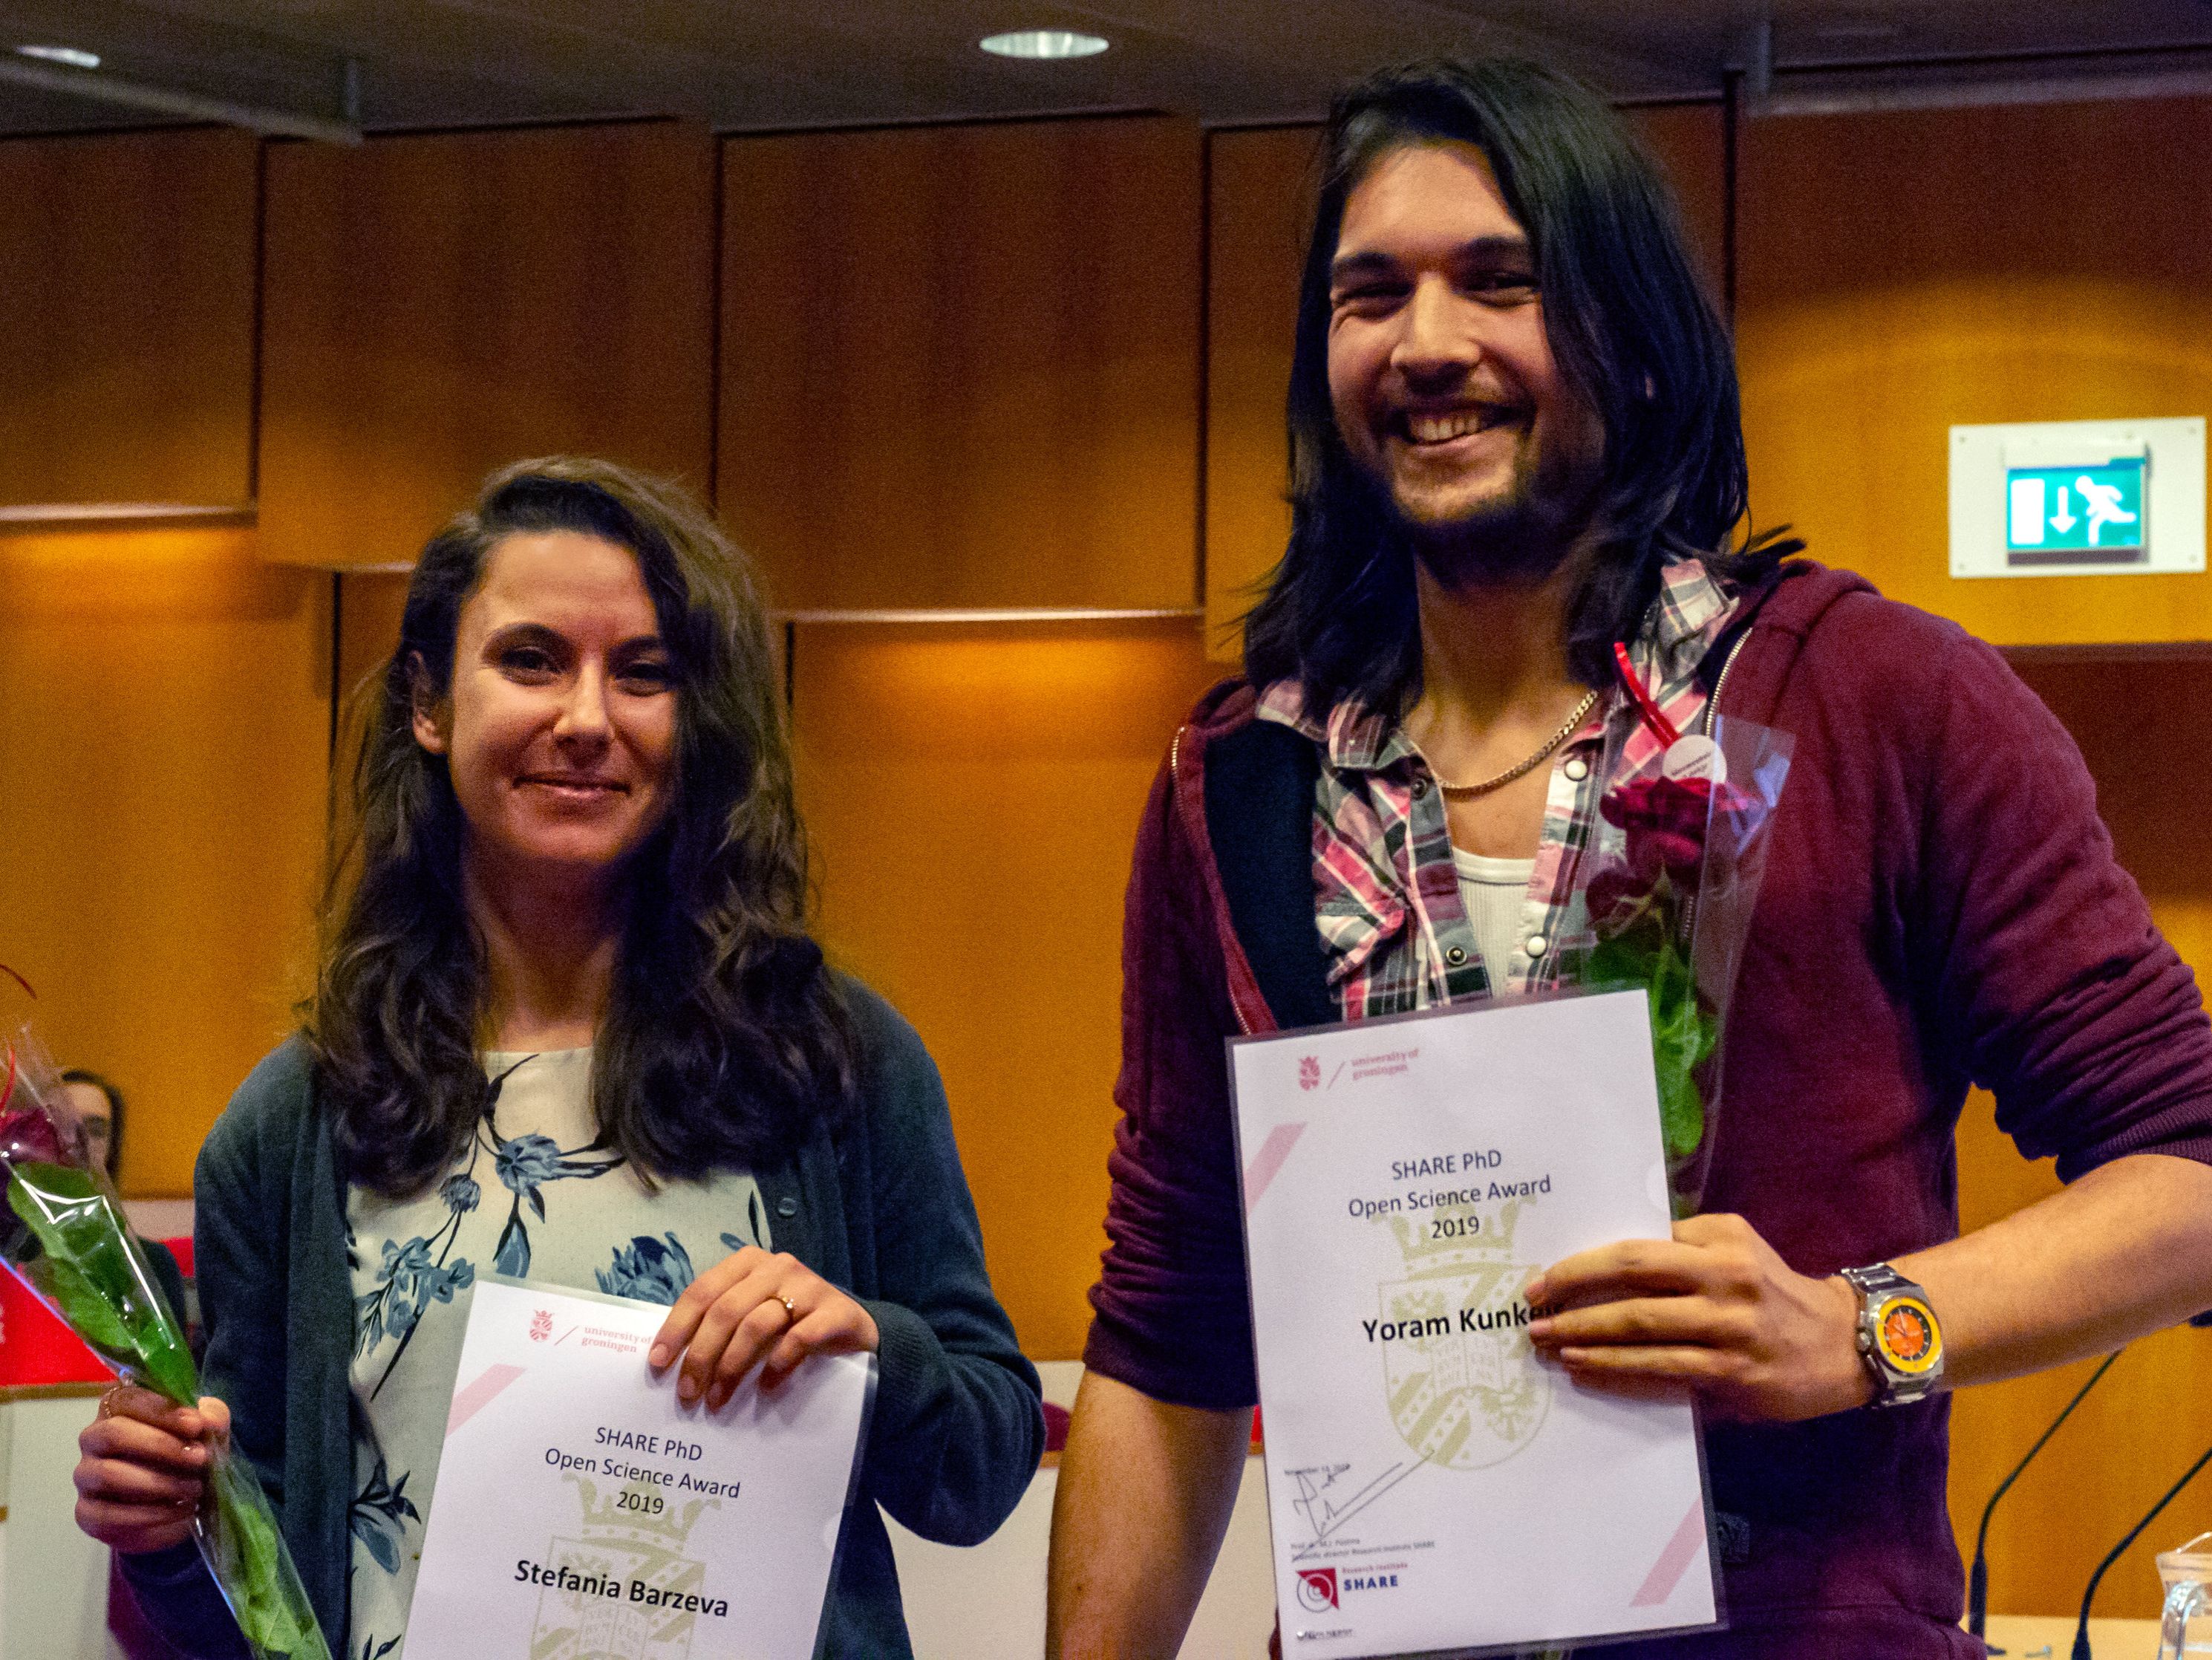 Stefania Barzeva and Yoram Kunkels receive the first SHARE Open Science Award